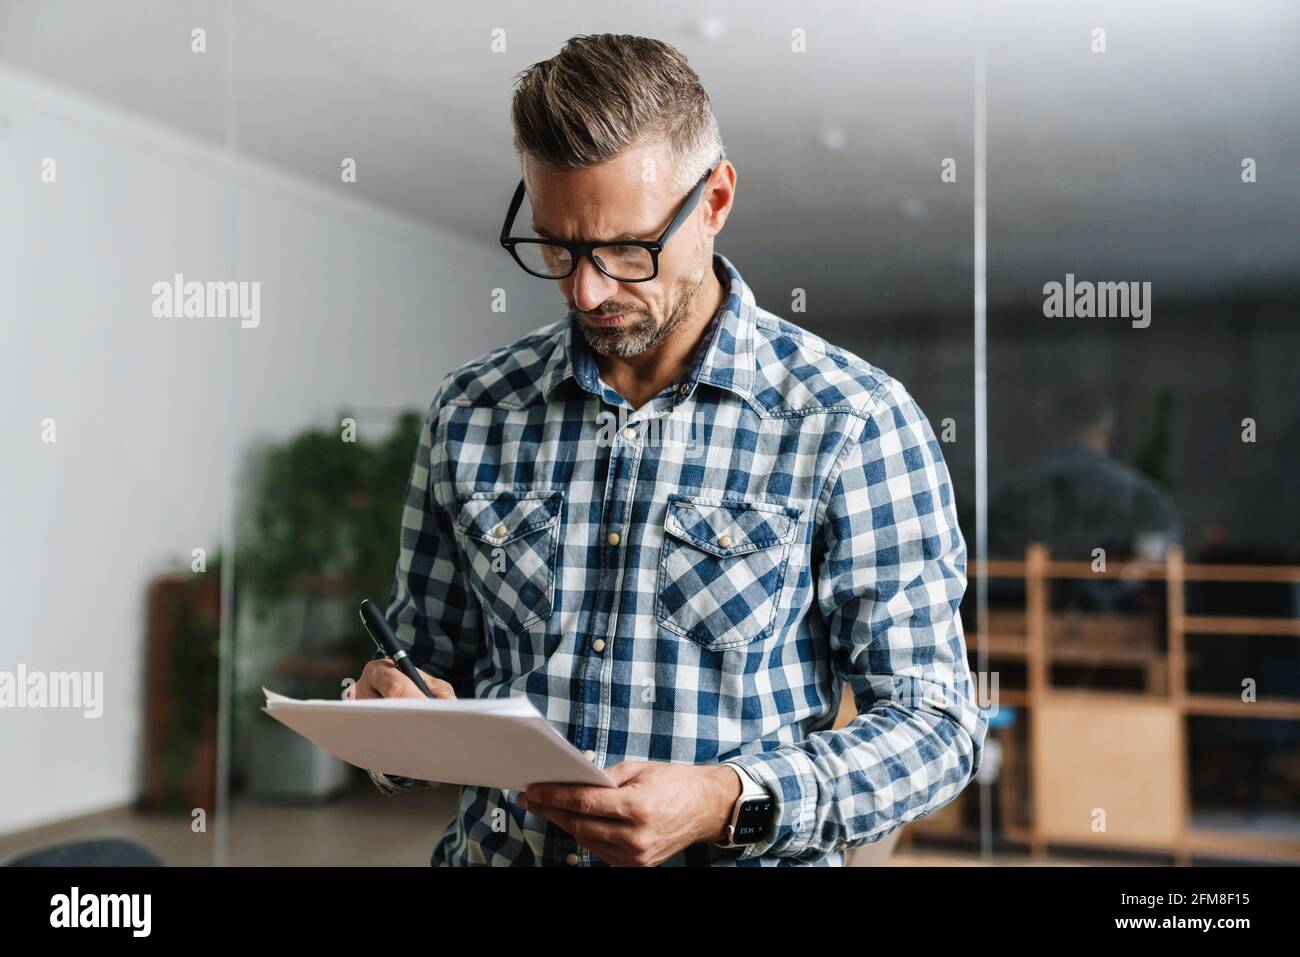 Serious white-haired man working with papers while standing in office Stock Photo